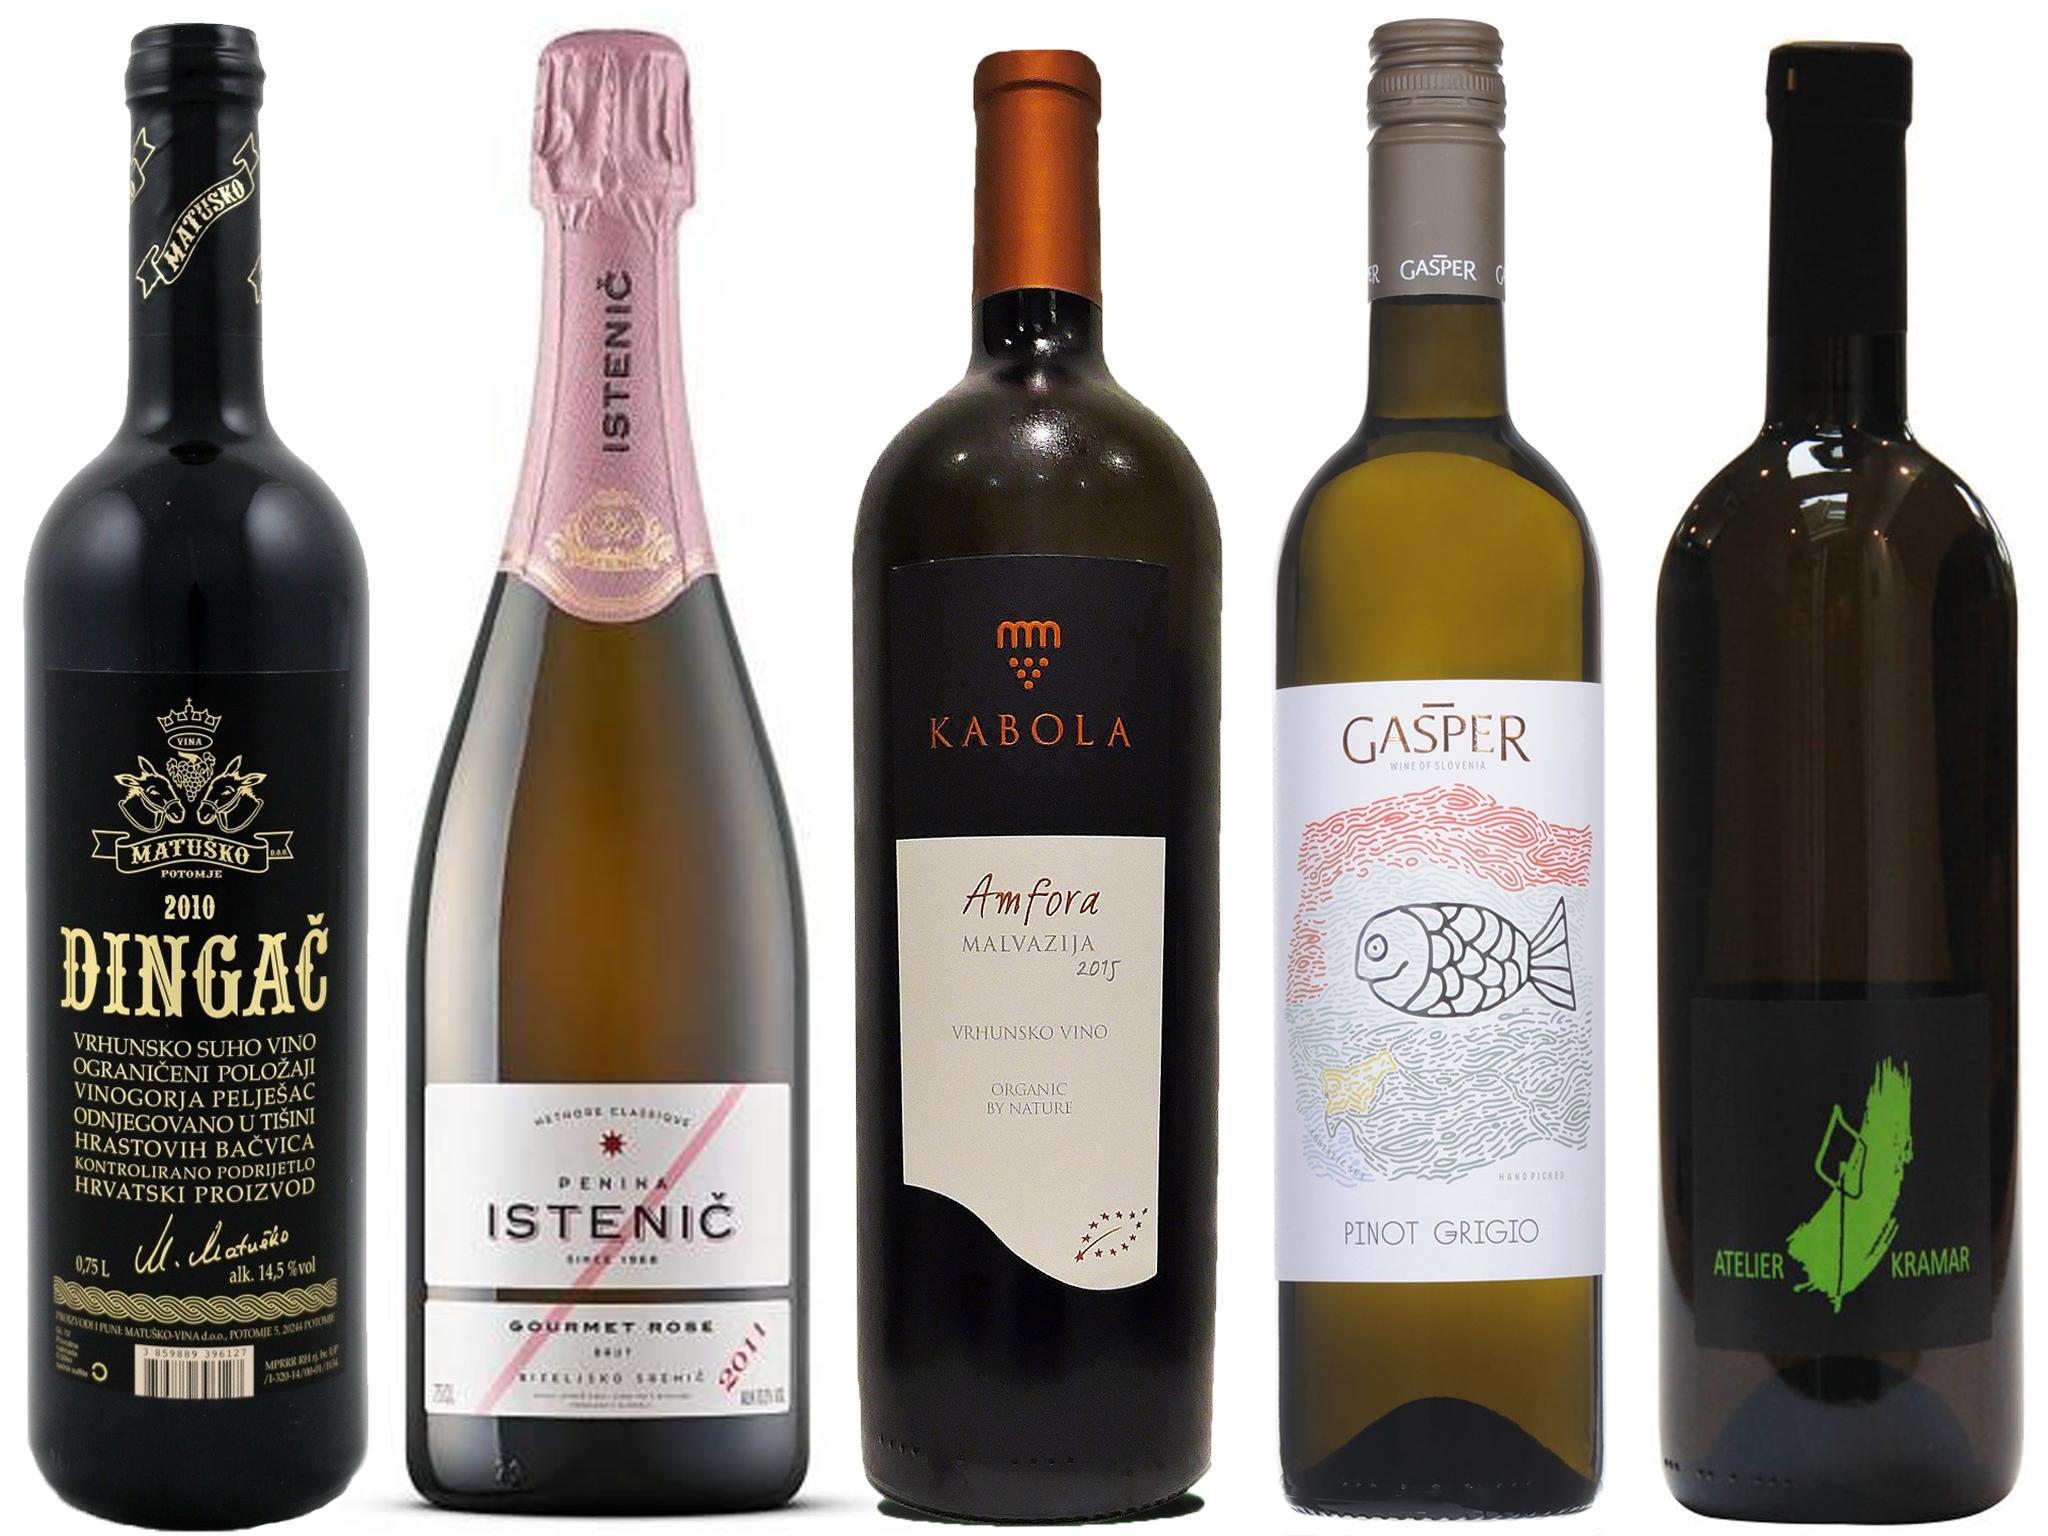 These wines are made from grapes such as grk, malvasia, rebula and plavac mali